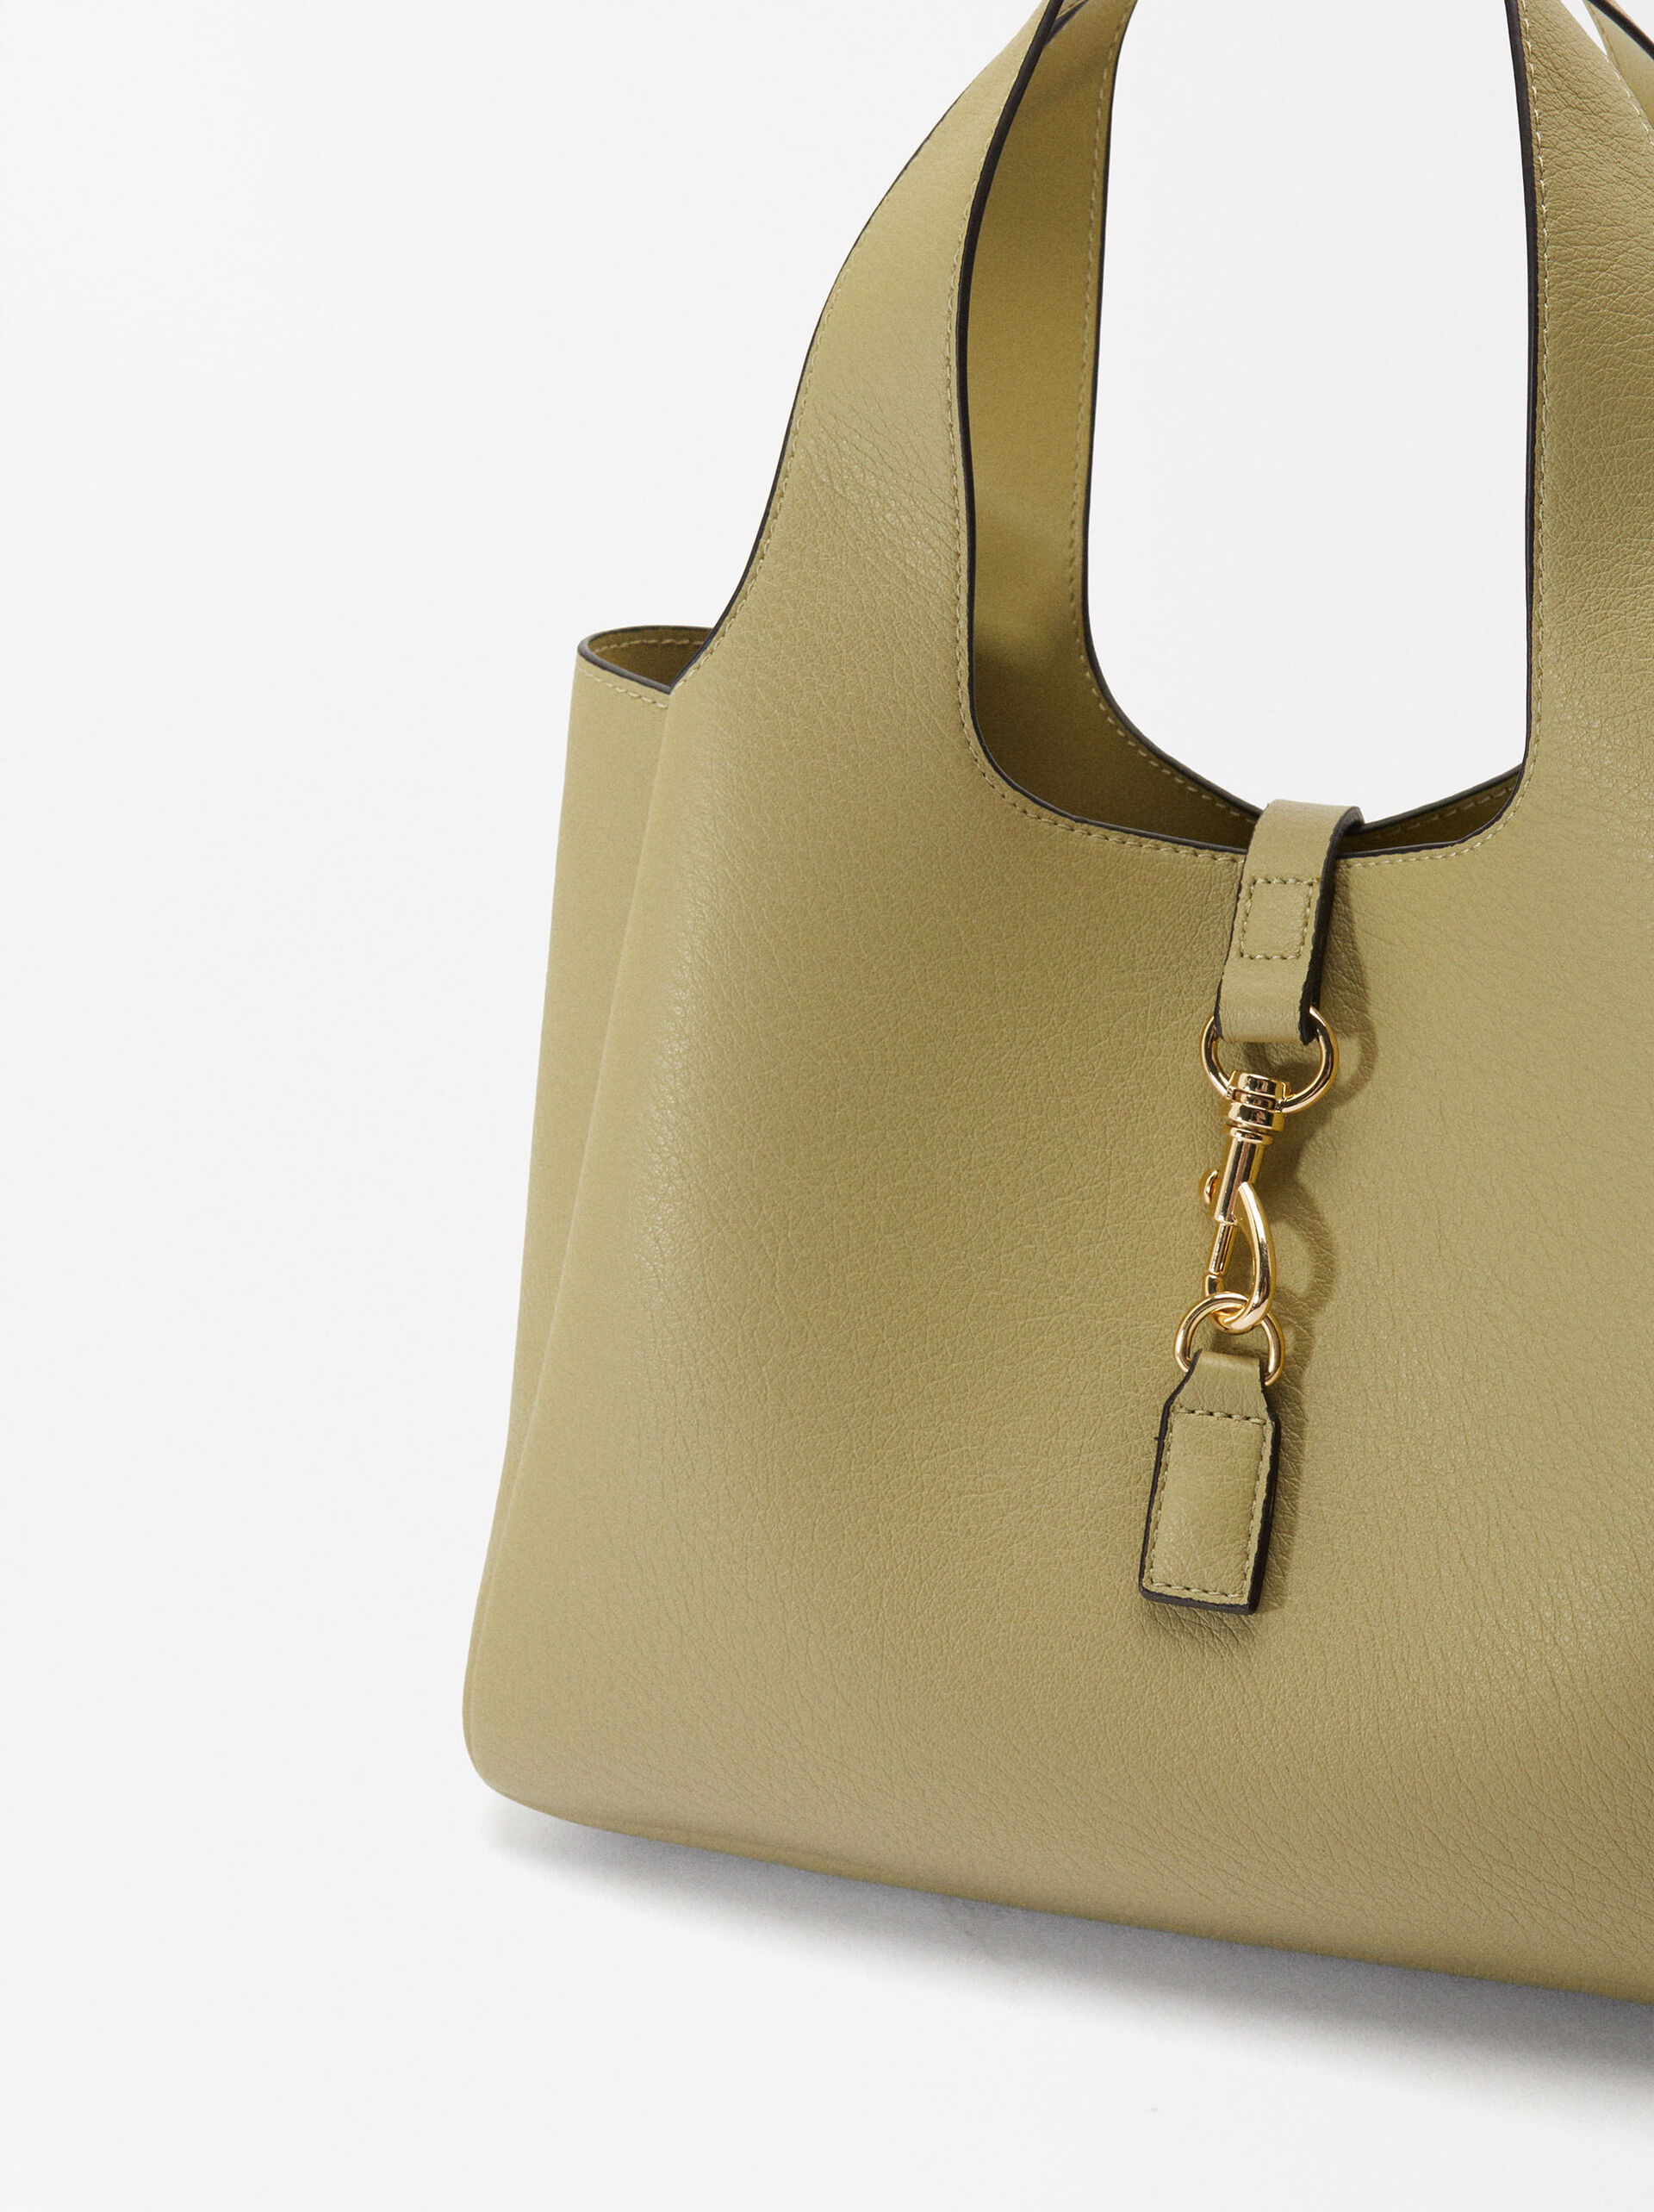 Bolso Tote Everyday image number 1.0